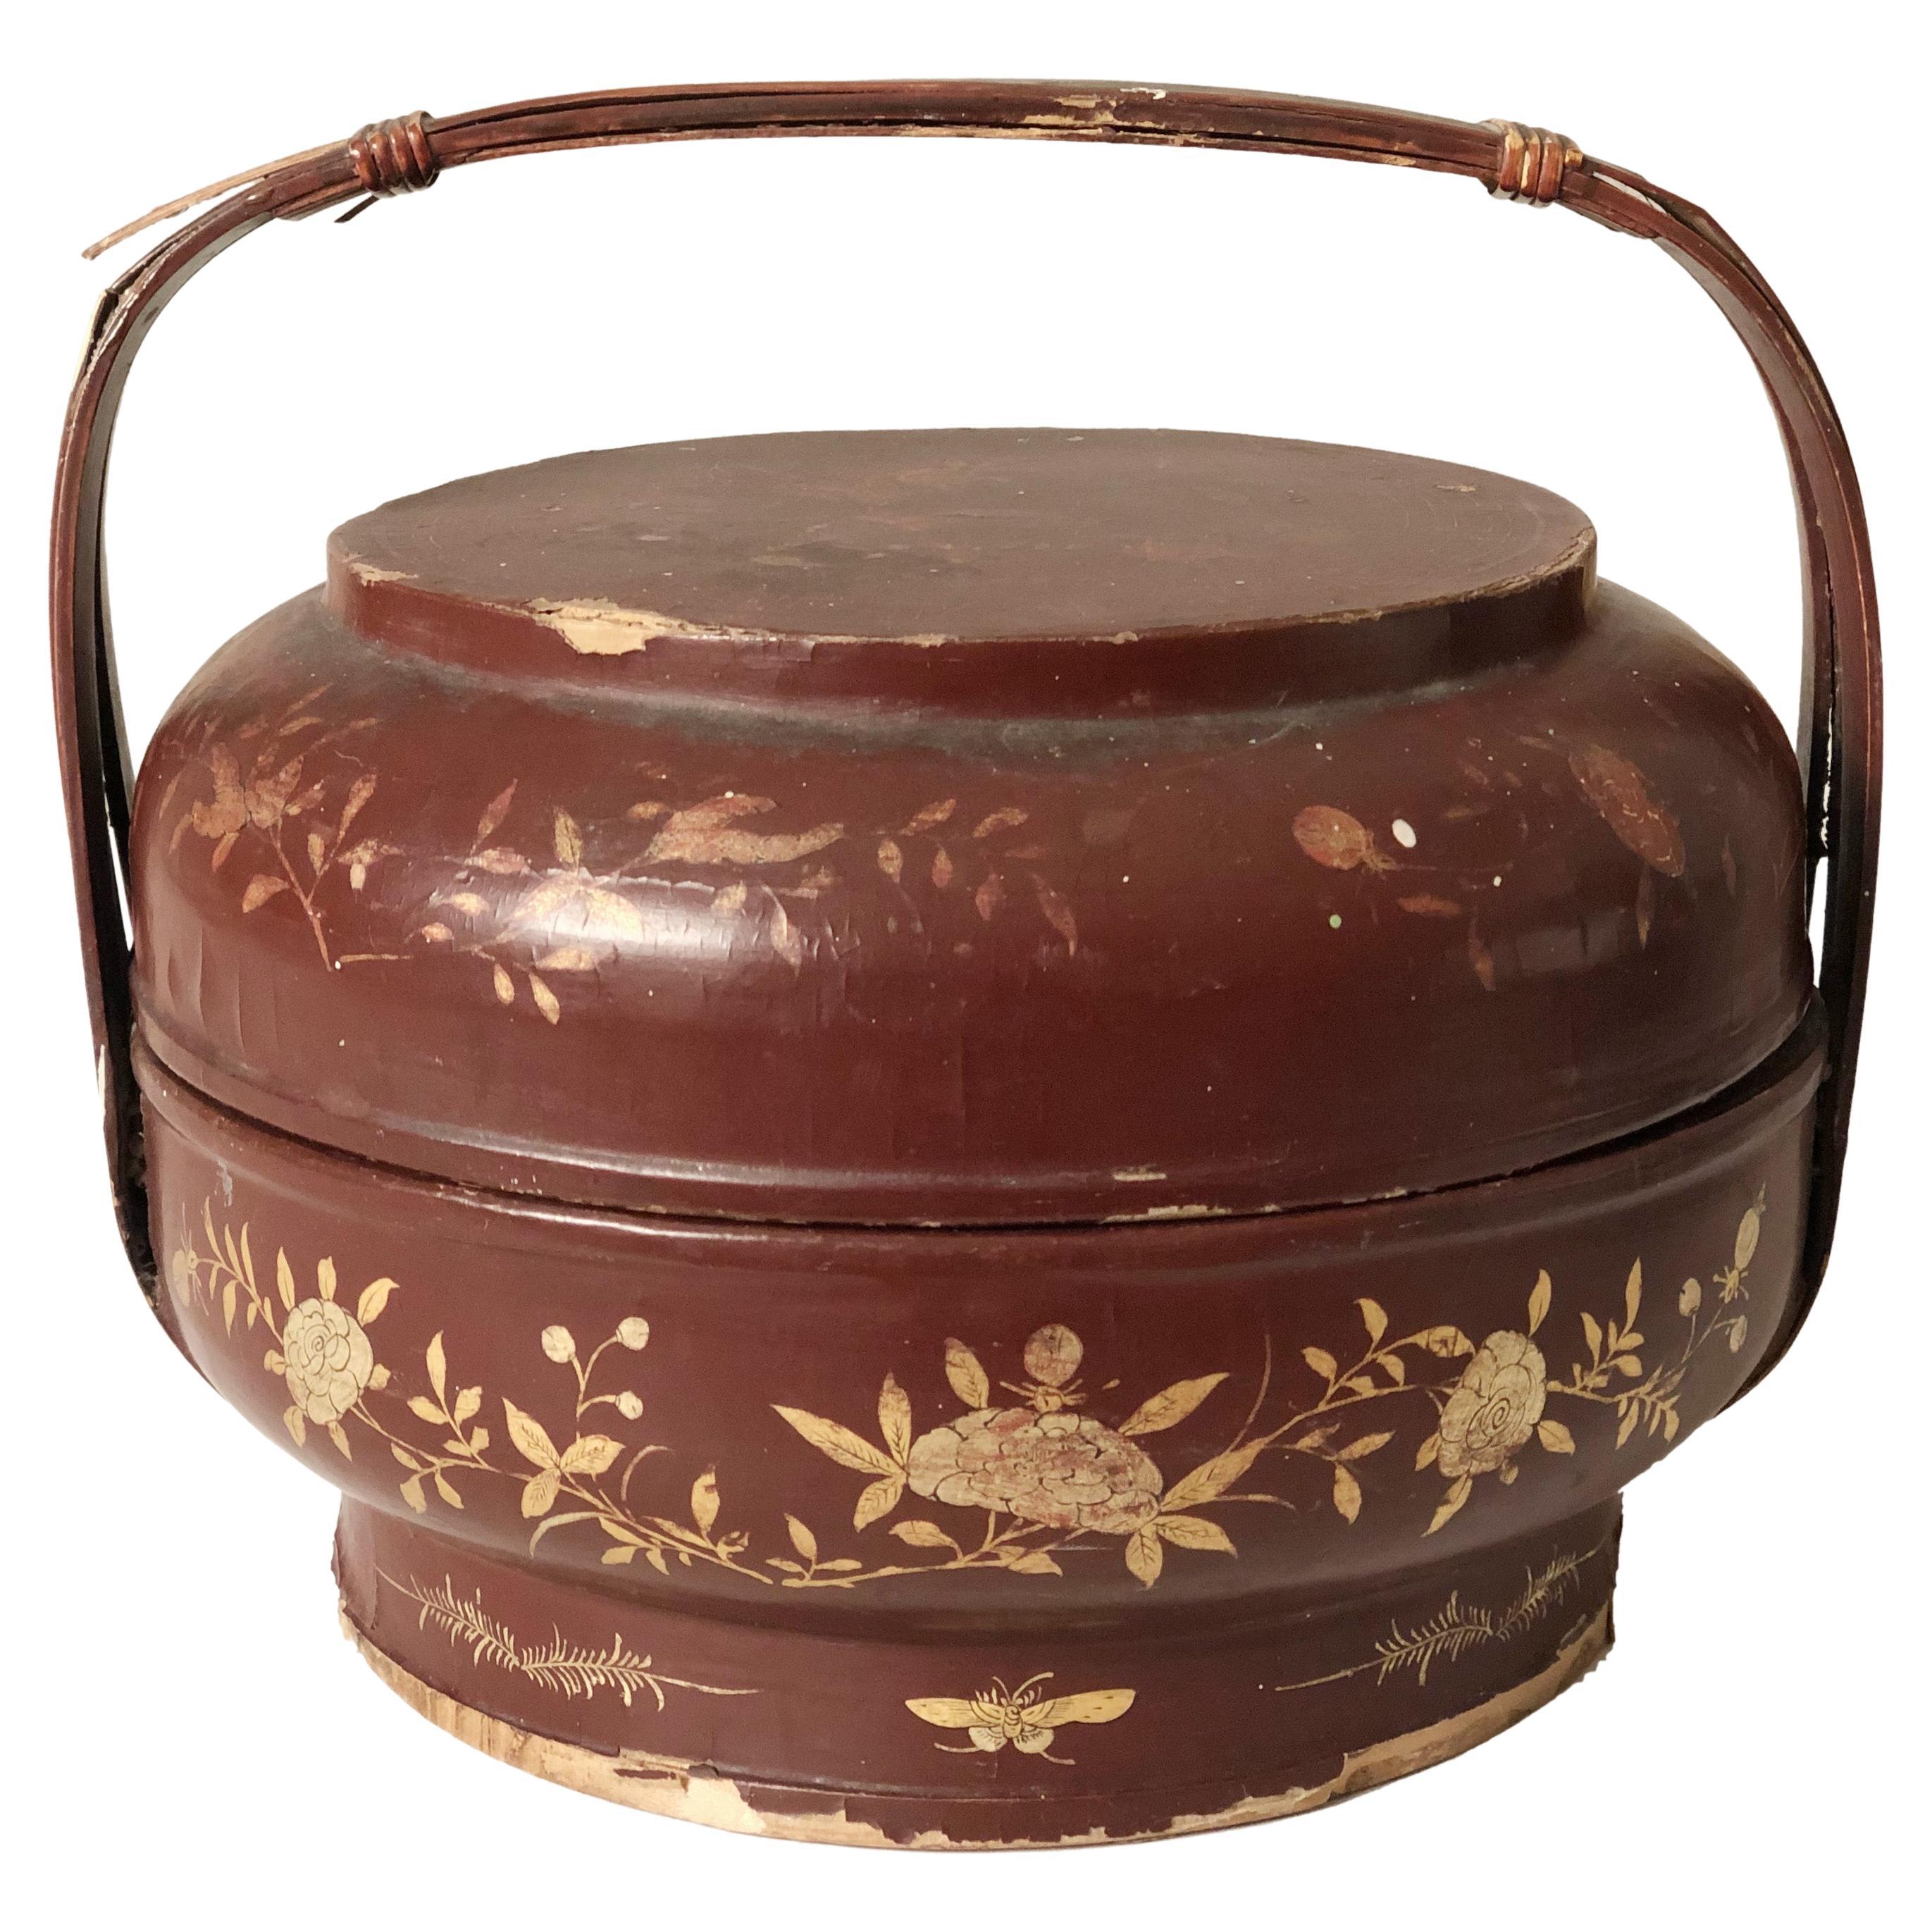 Chinese Gilt Burgundy Lacquer Carrying Box, c. 1900